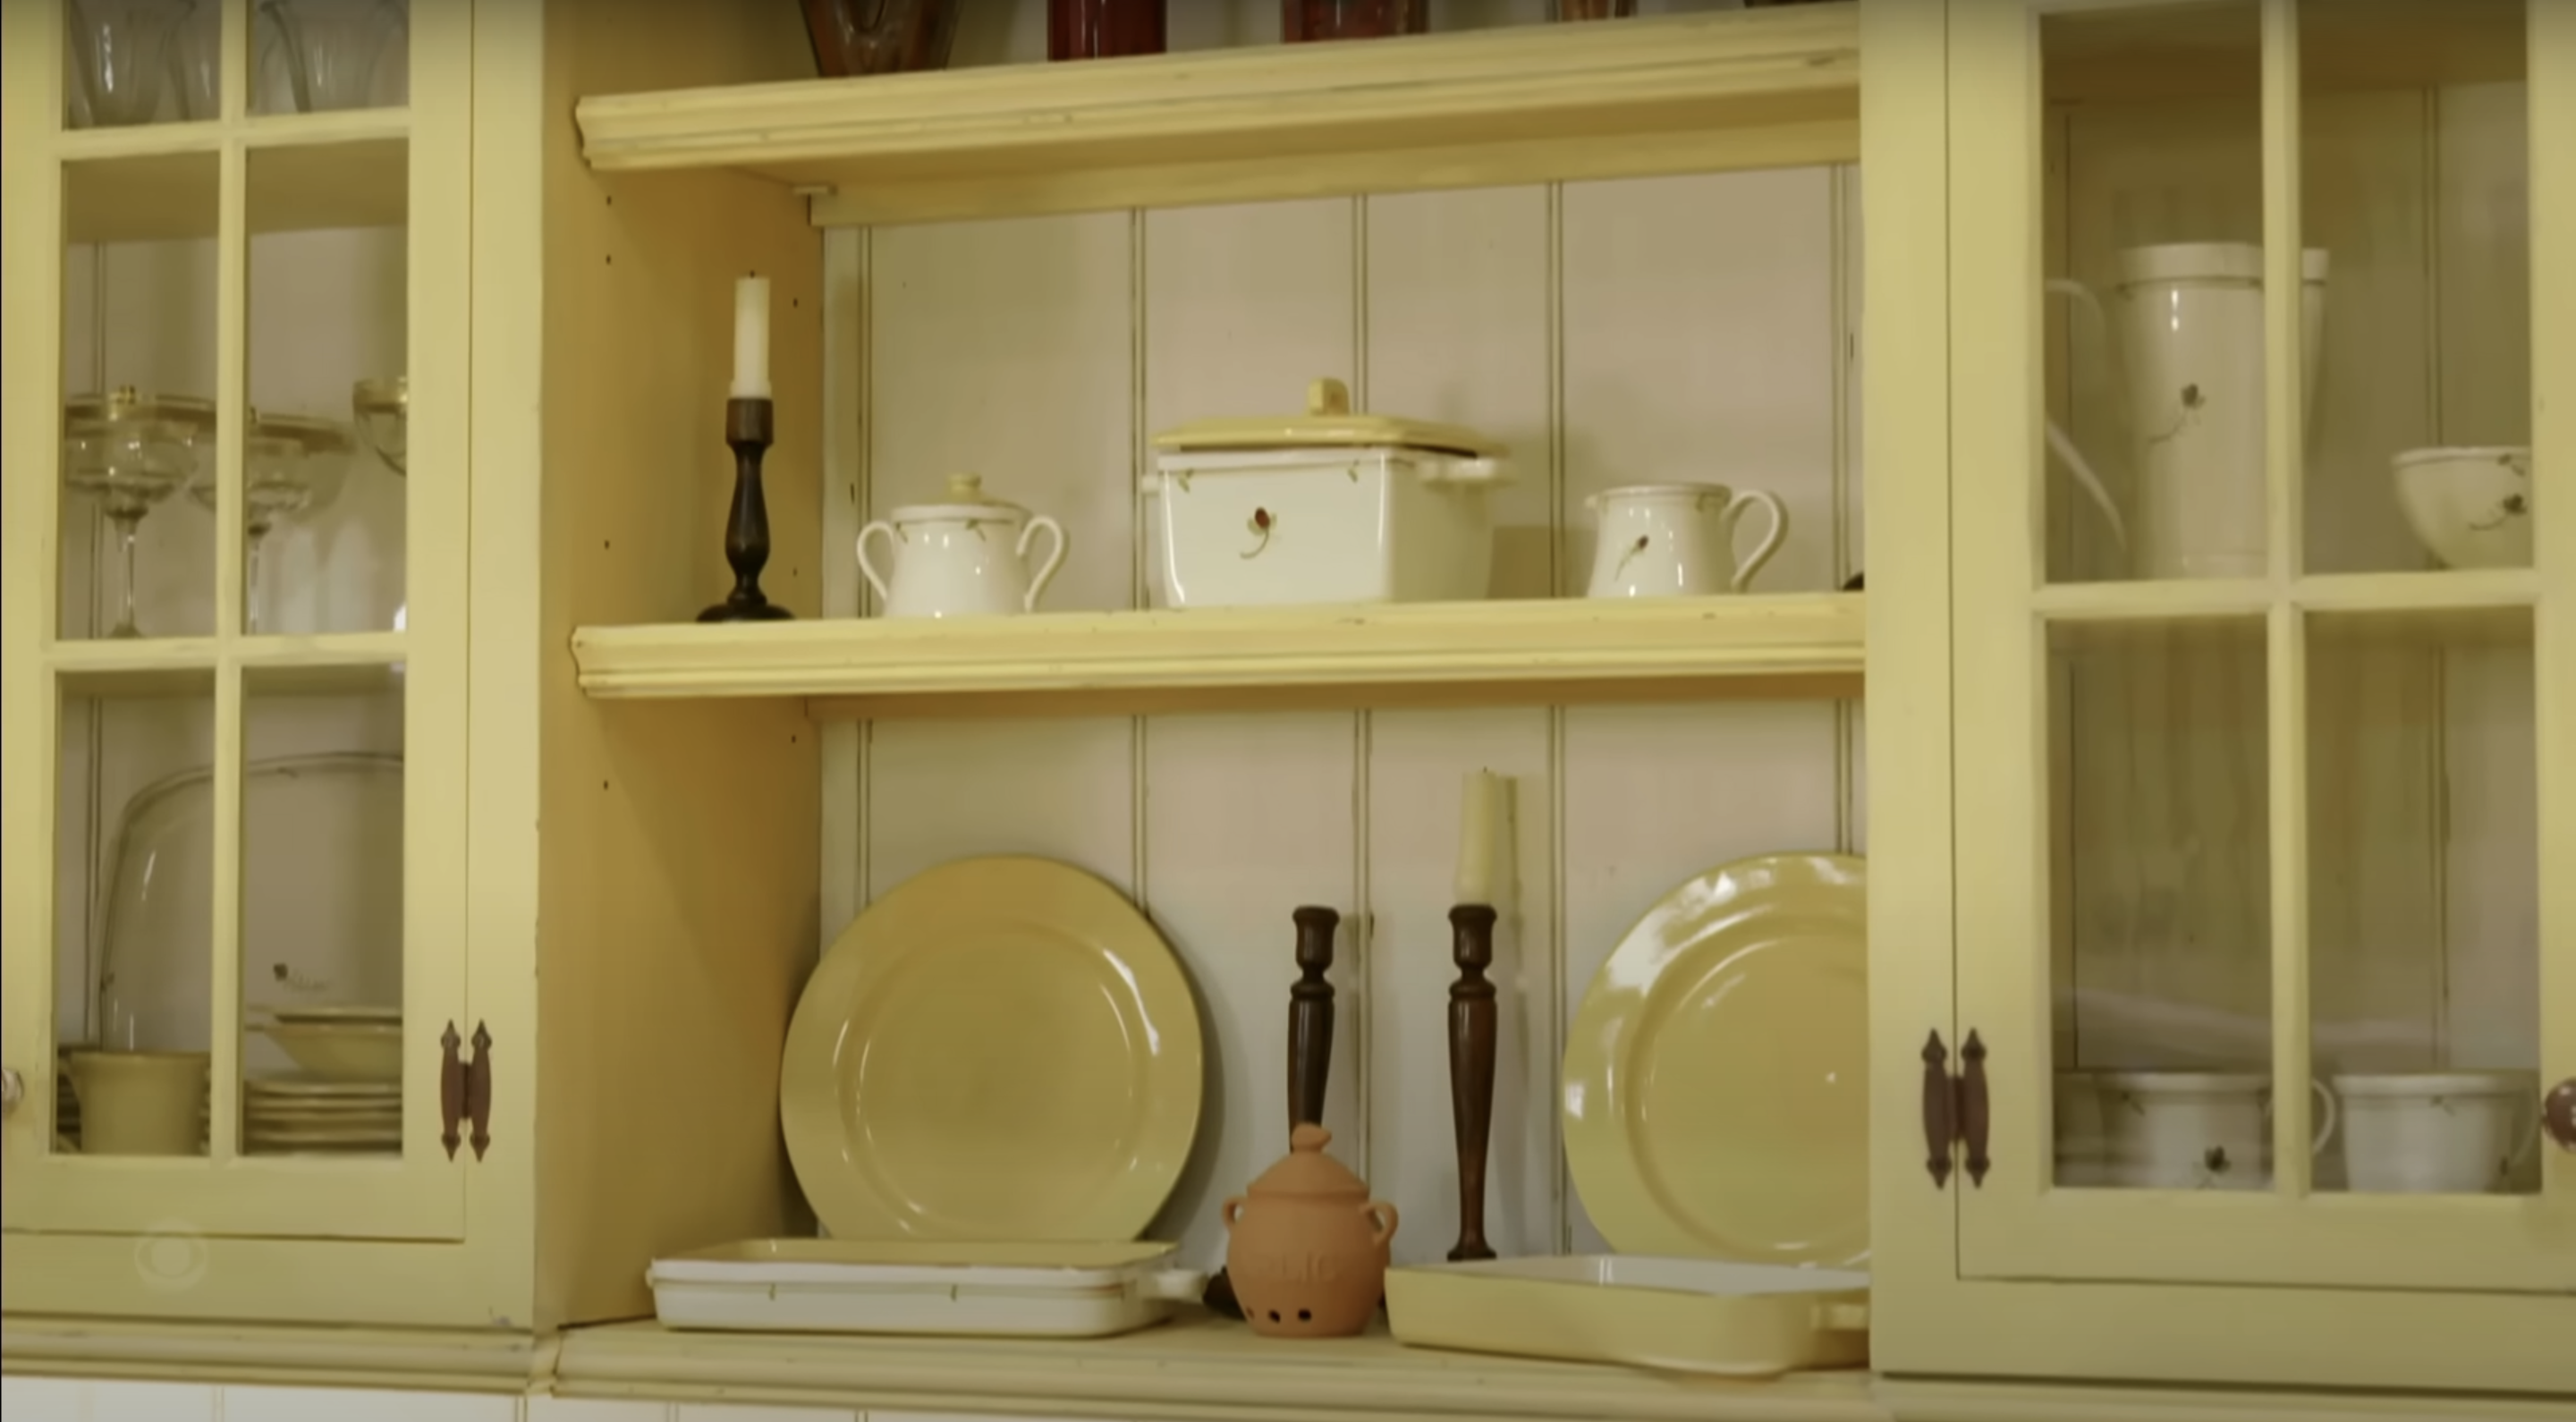 A view of the kitchen ware and crockery in Barbra Streisand's home, A view inside Barbra Streisand's home, posted on November 14, 2023 | Source: YouTube/The Late Show with Stephen Colbert